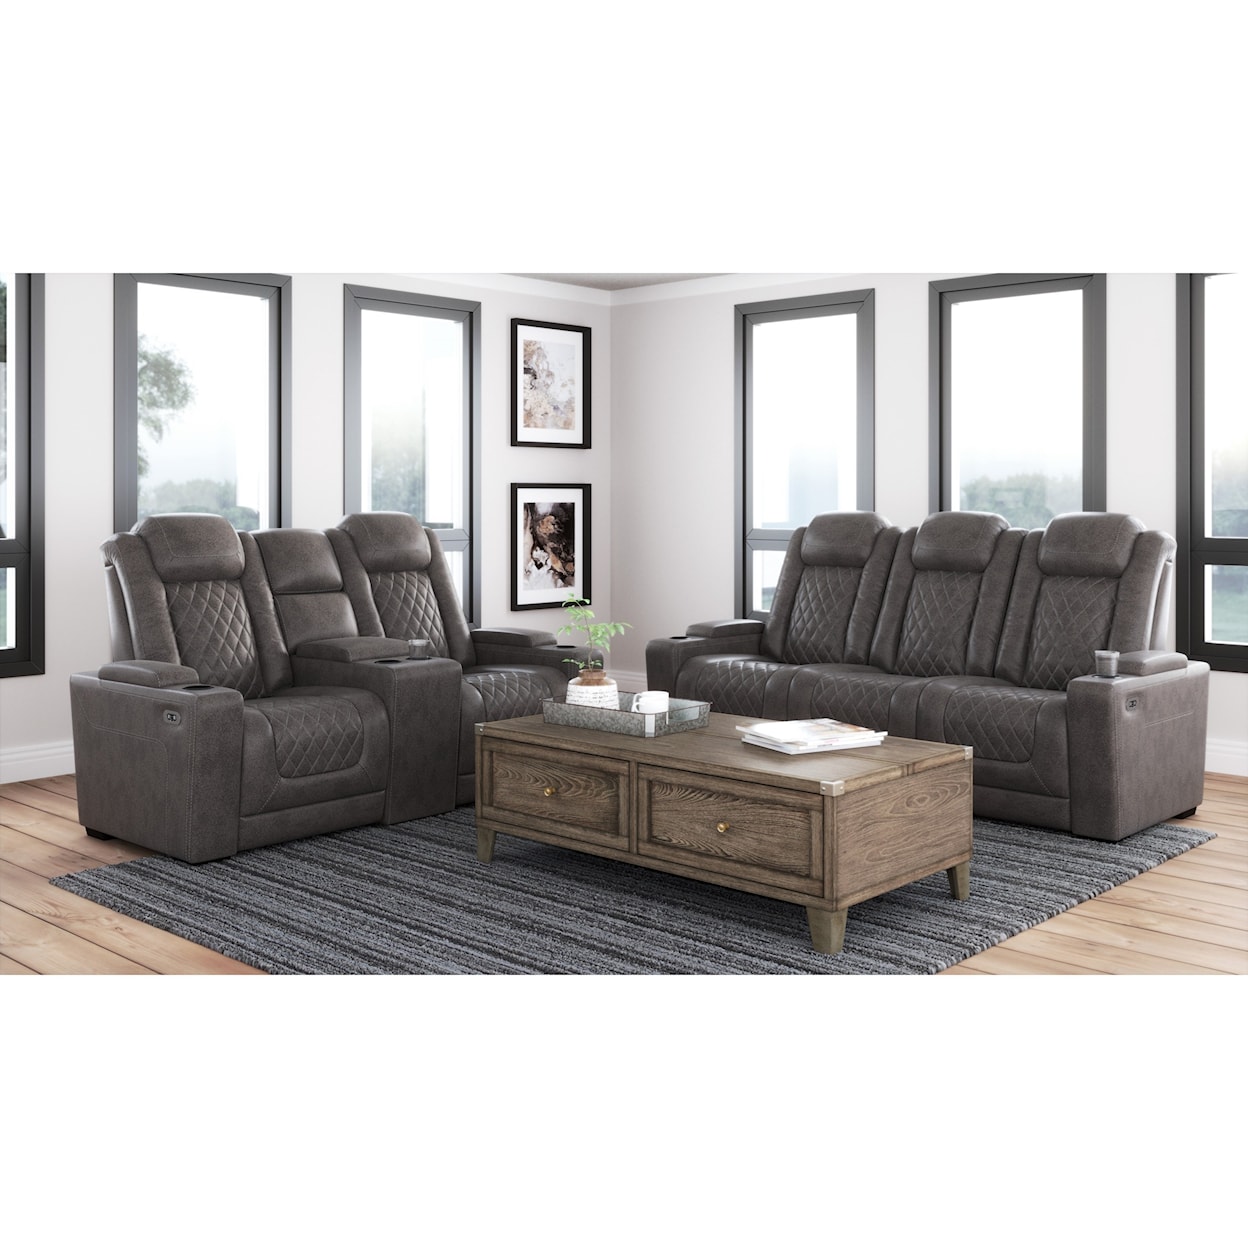 Signature Design by Ashley Hyllmont Power Reclining Sofa with Adj Headrests